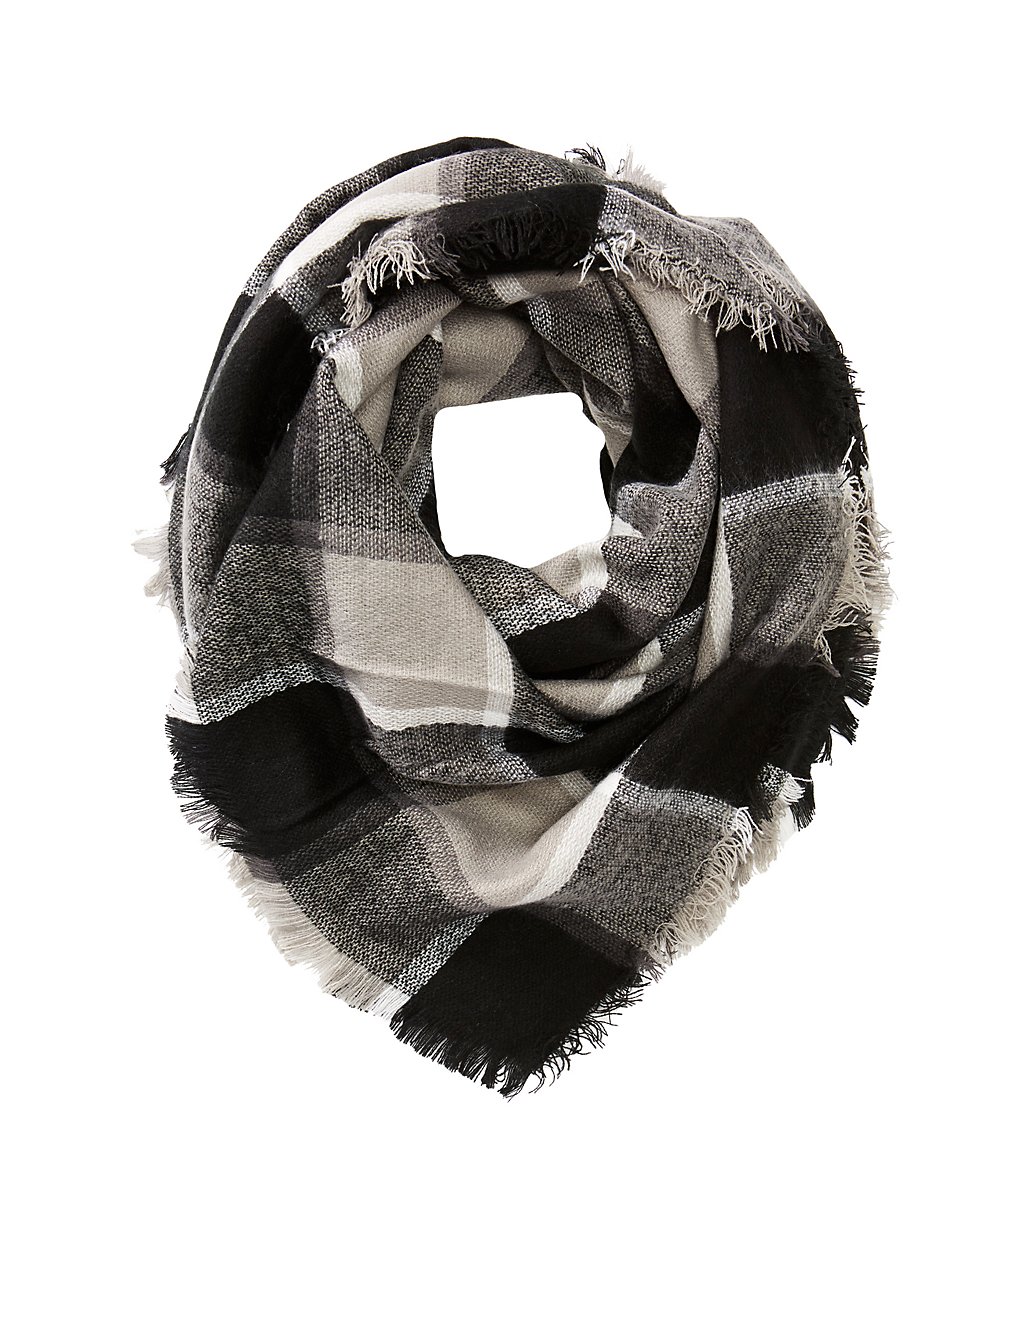 This is one of the best websites to find plaid scarves for women!